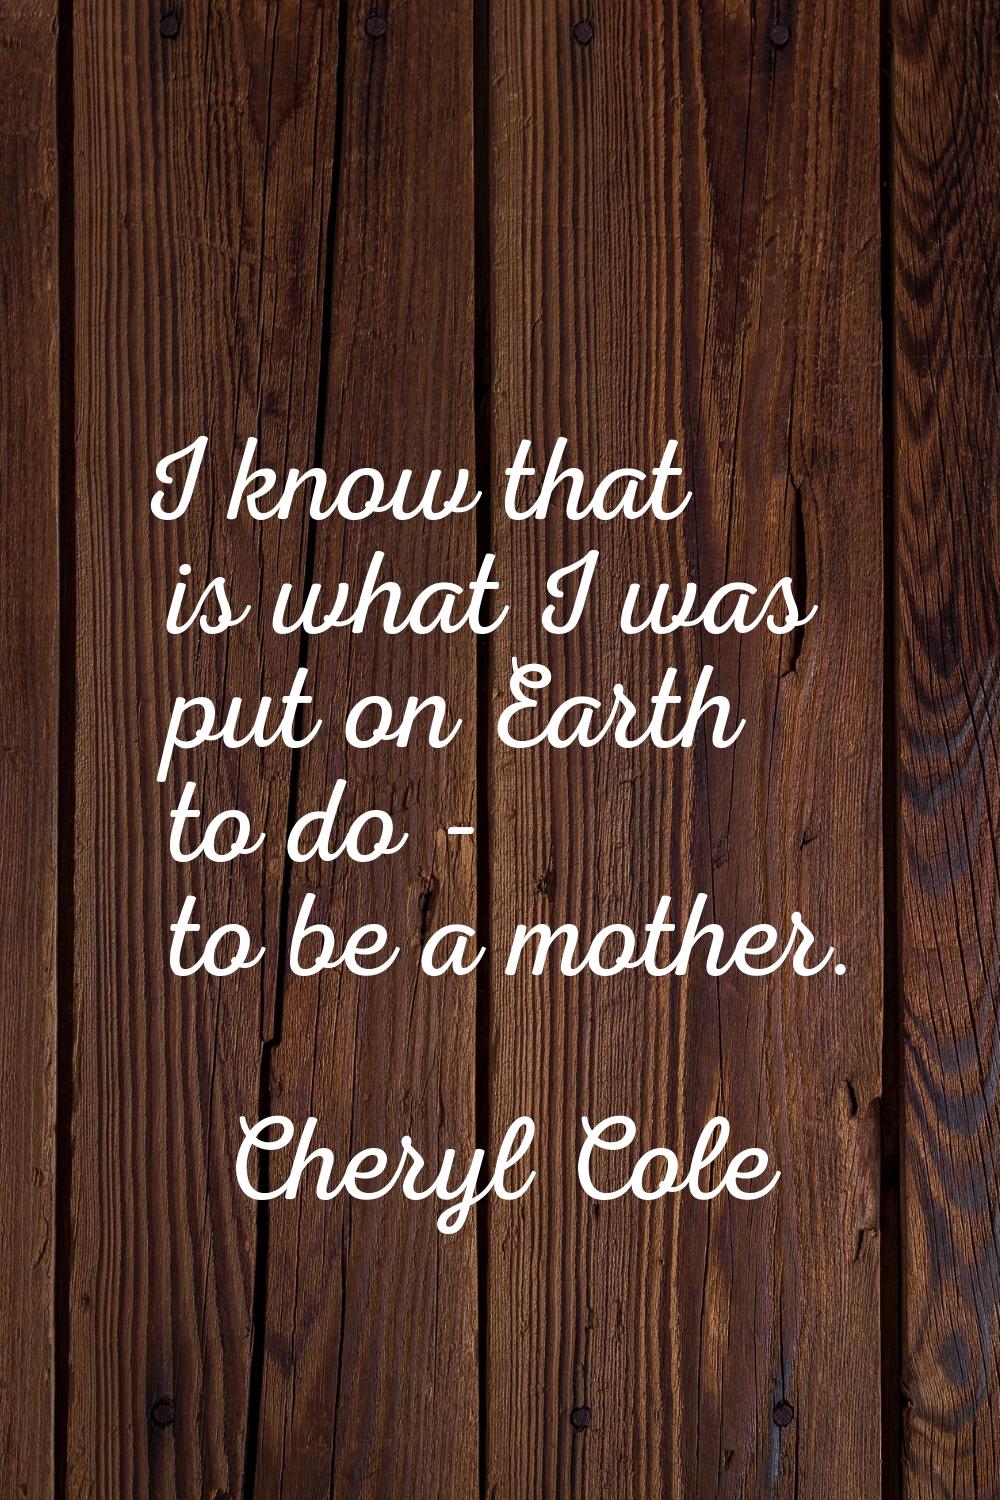 I know that is what I was put on Earth to do - to be a mother.